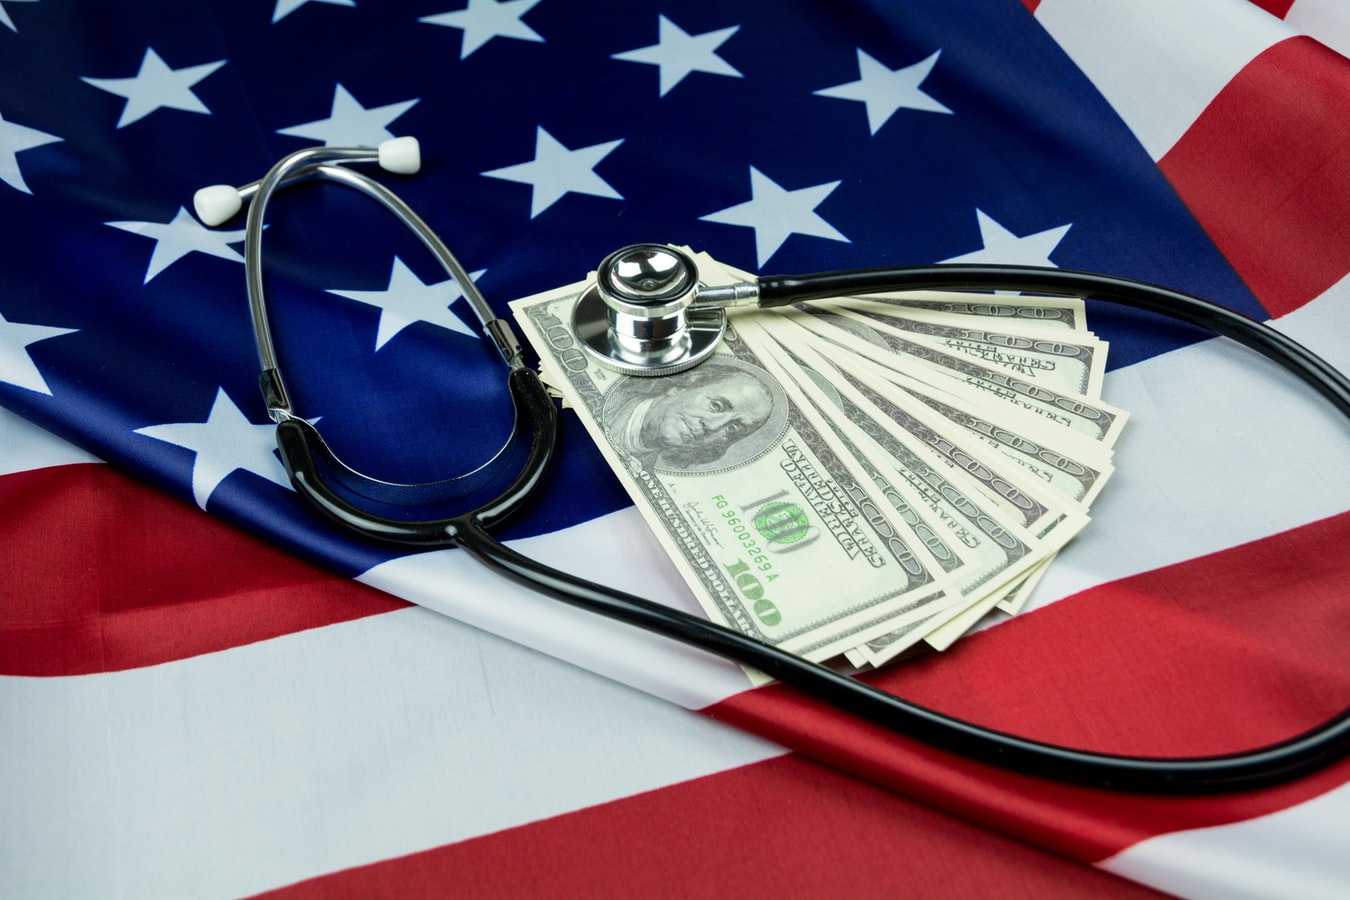 A stethoscope on top of money and an american flag. Excessive drinking can lead to extreme healthcare costs